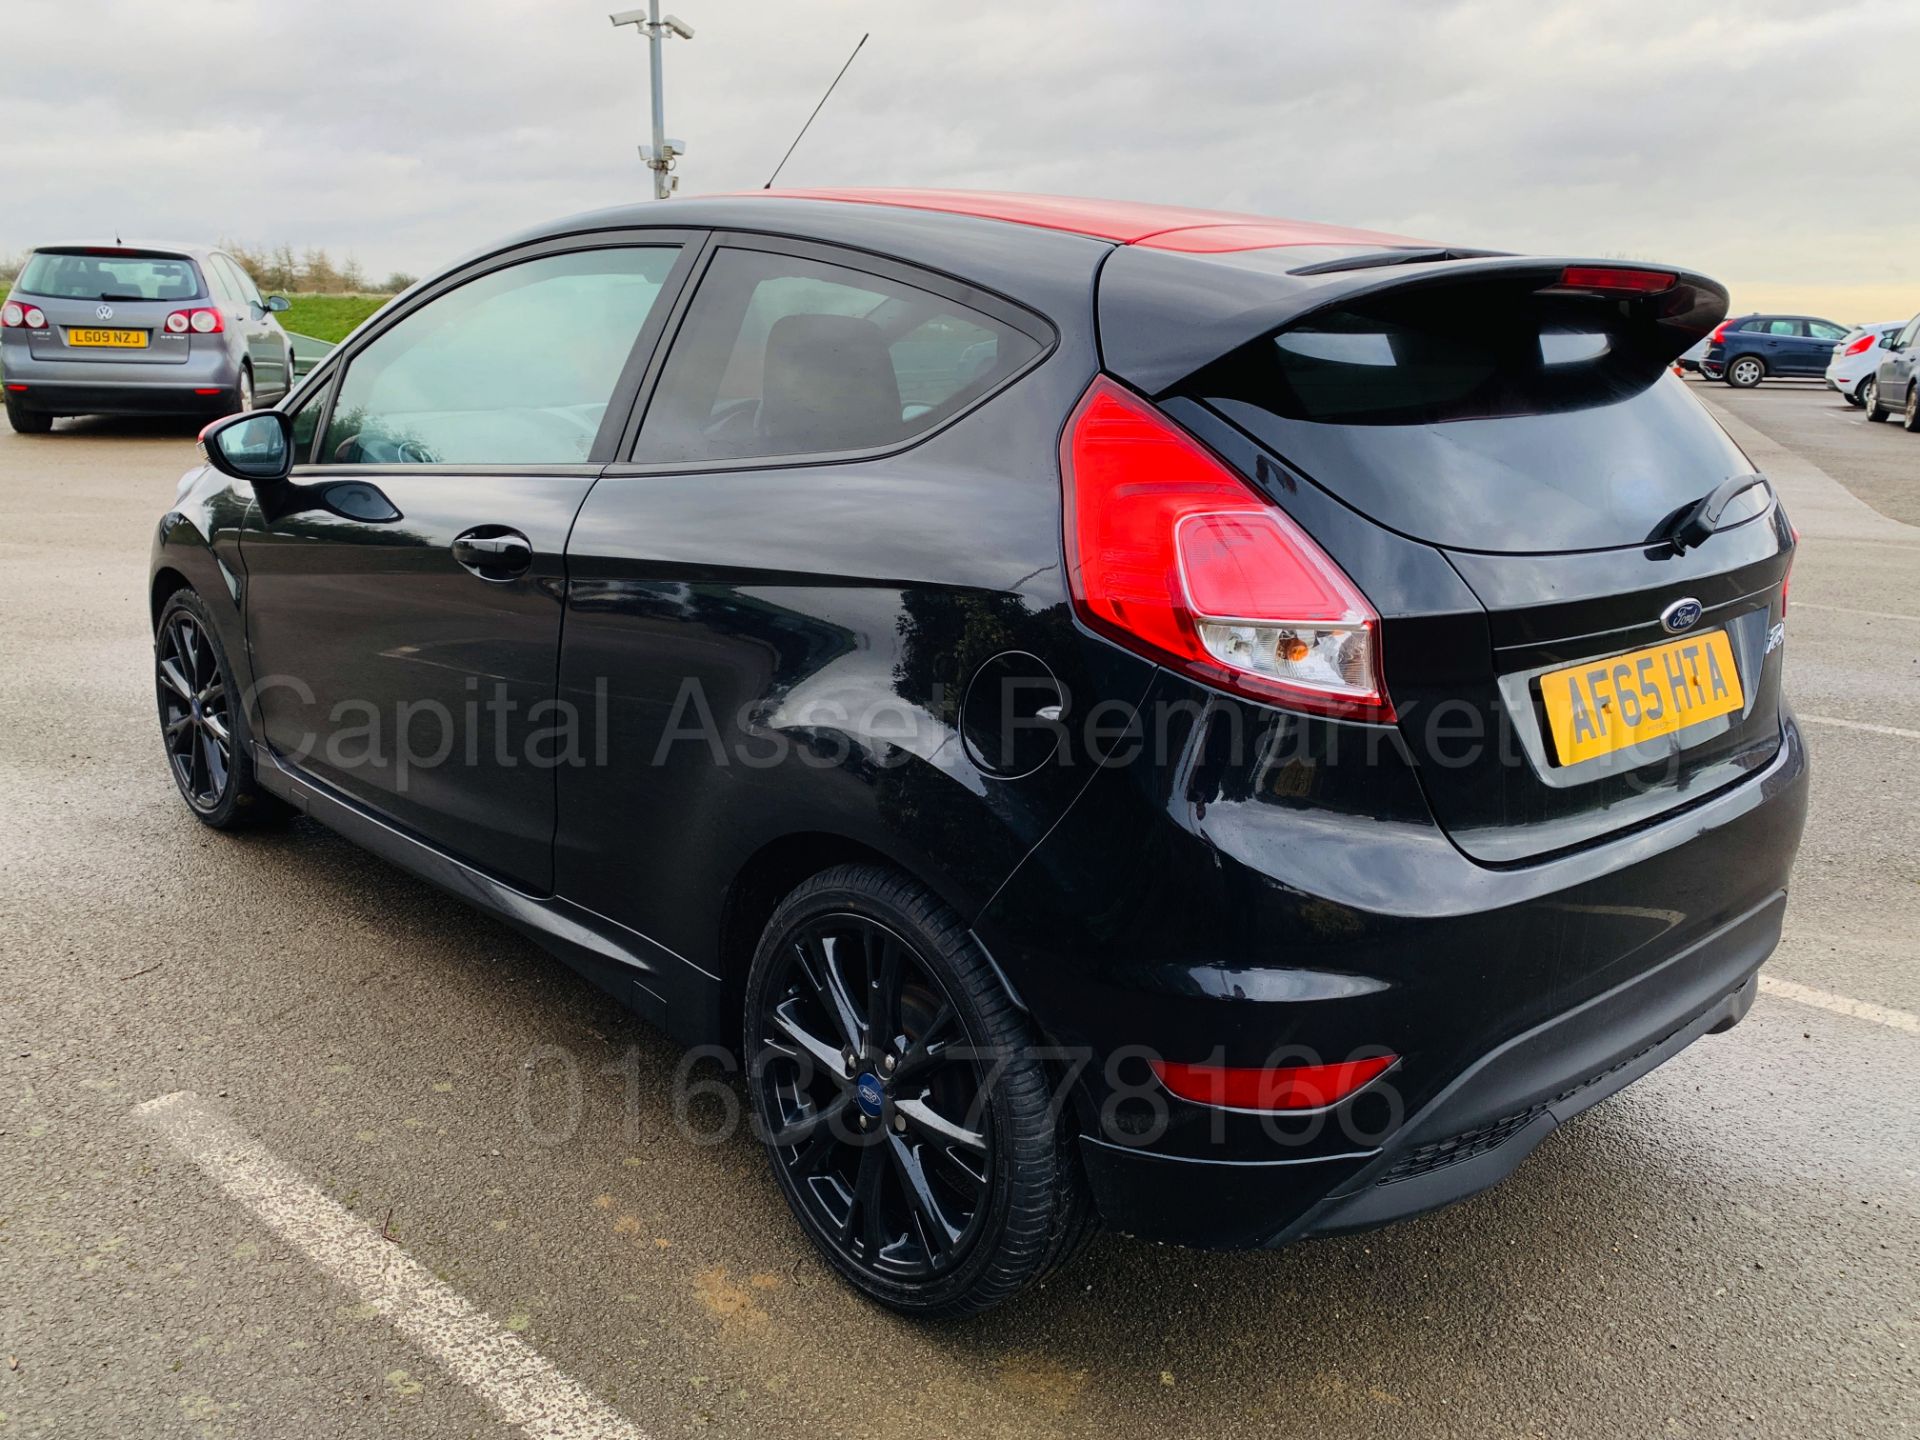 (On Sale) FORD FIESTA *ZETEC S - BLACK EDITION* (2016 MODEL) '1.0L ECO-BOOST - 140 BHP' - Image 7 of 45